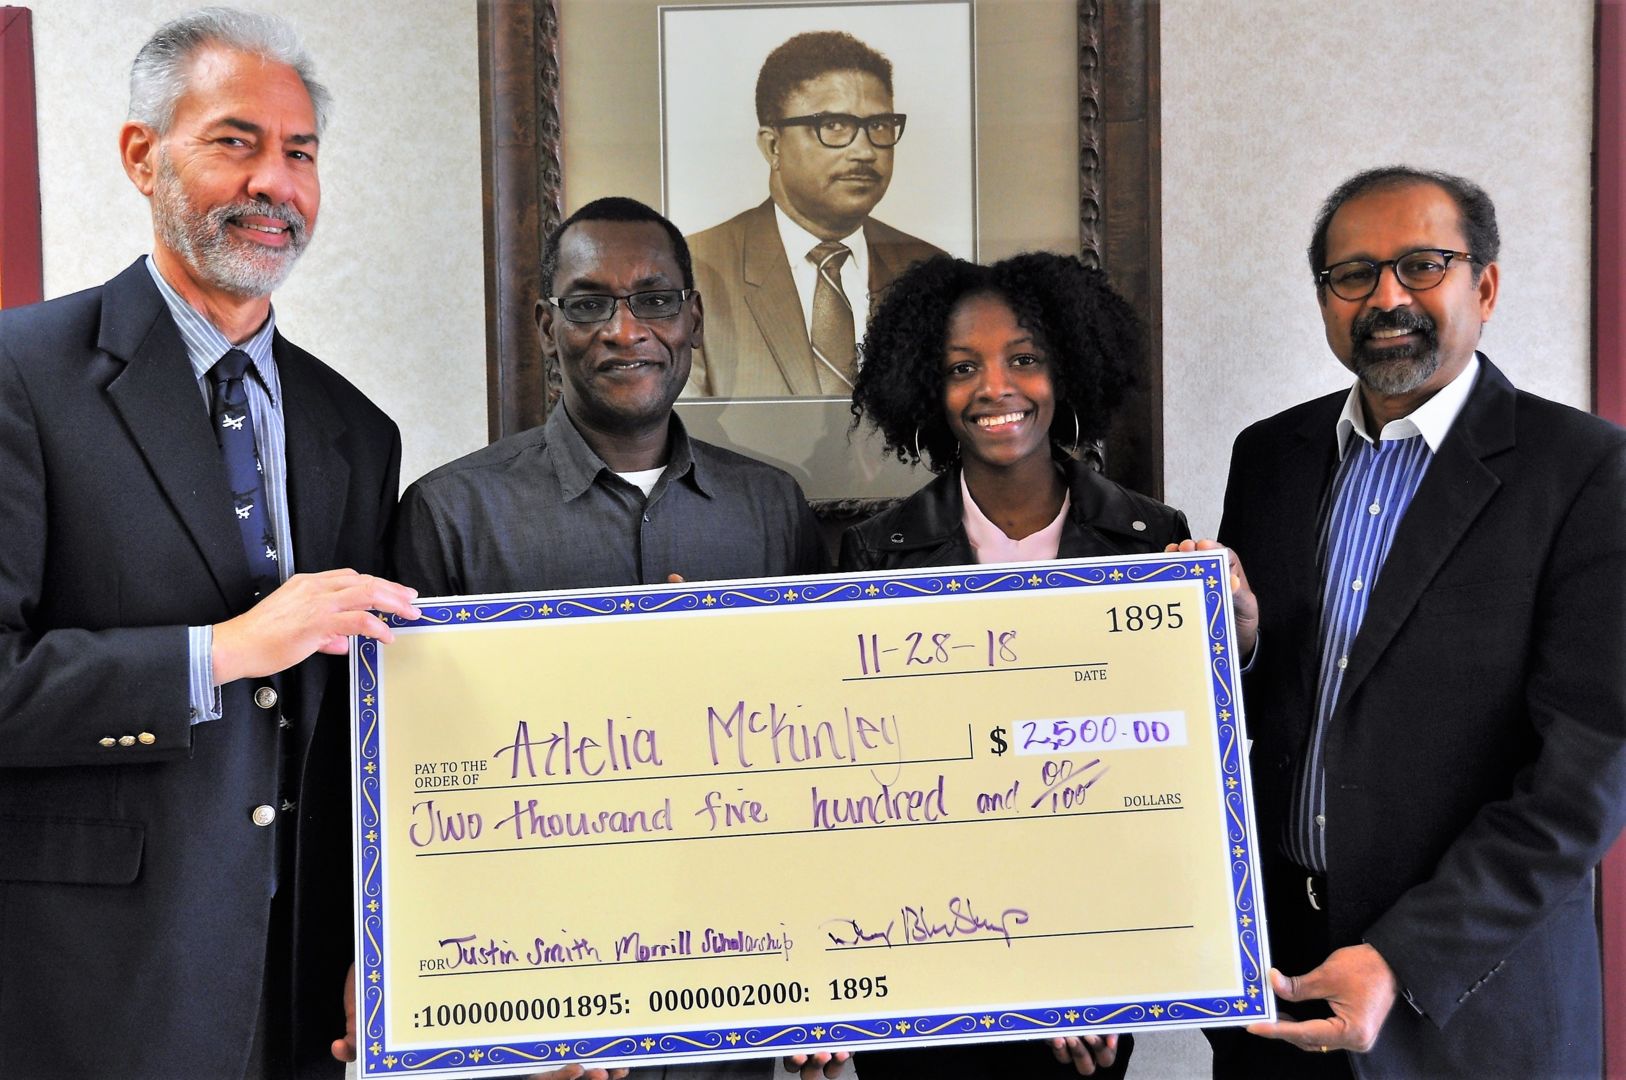 Fort Valley State University senior Adelia McKinley accepts a $2,500 Justin Smith Morrill Scholarship, which will help pay for college expenses. She is pictured with (from left to right) Dr. Daniel Blankenship, interim dean for the College of Agriculture, Family Sciences and Technology; Dr. Mohammed Ibrahim, coordinator and professor of the agricultural economics program; and Dr. Govind Kannan, associate dean for research.